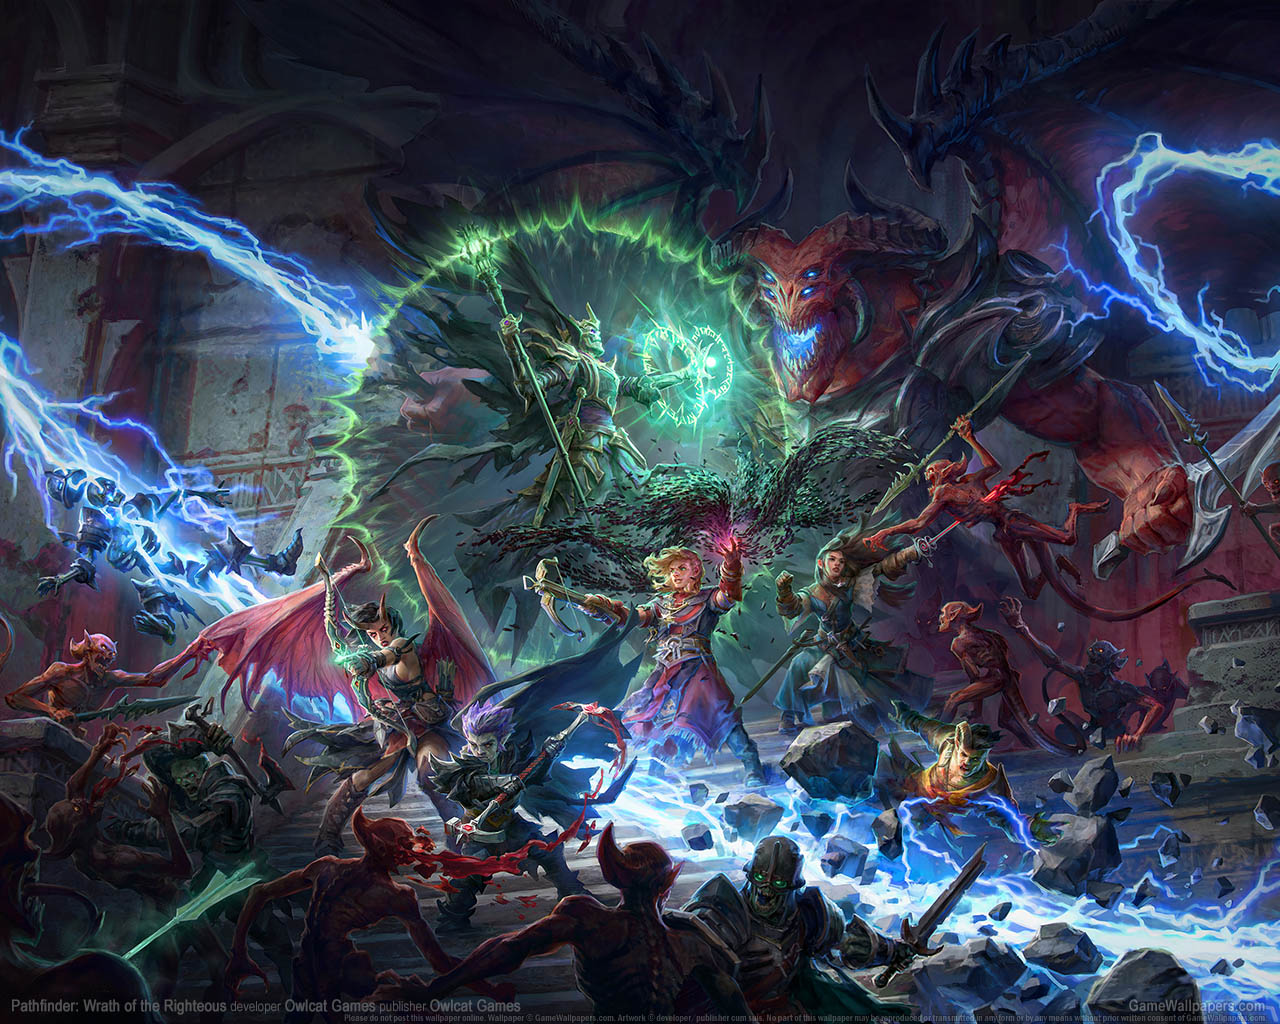 Pathfinder%253A Wrath of the Righteous wallpaper 02 1280x1024